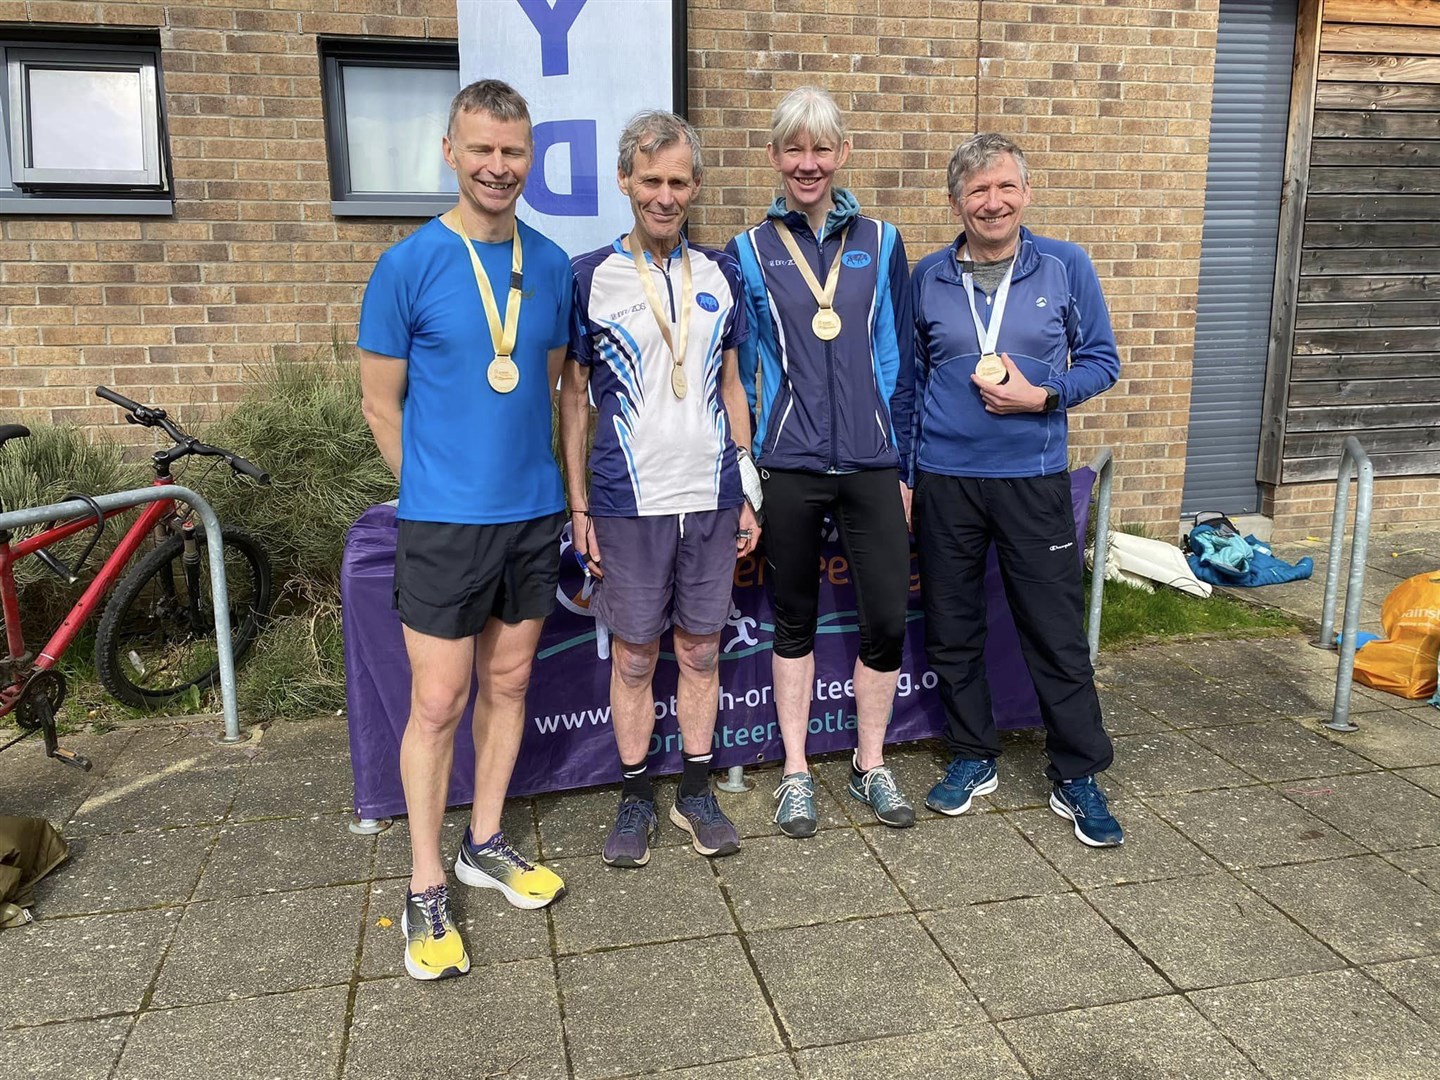 Alan Campbell, Eddie Harwood, Morag McLuckie and Colin Hall all won medals for Moravian.